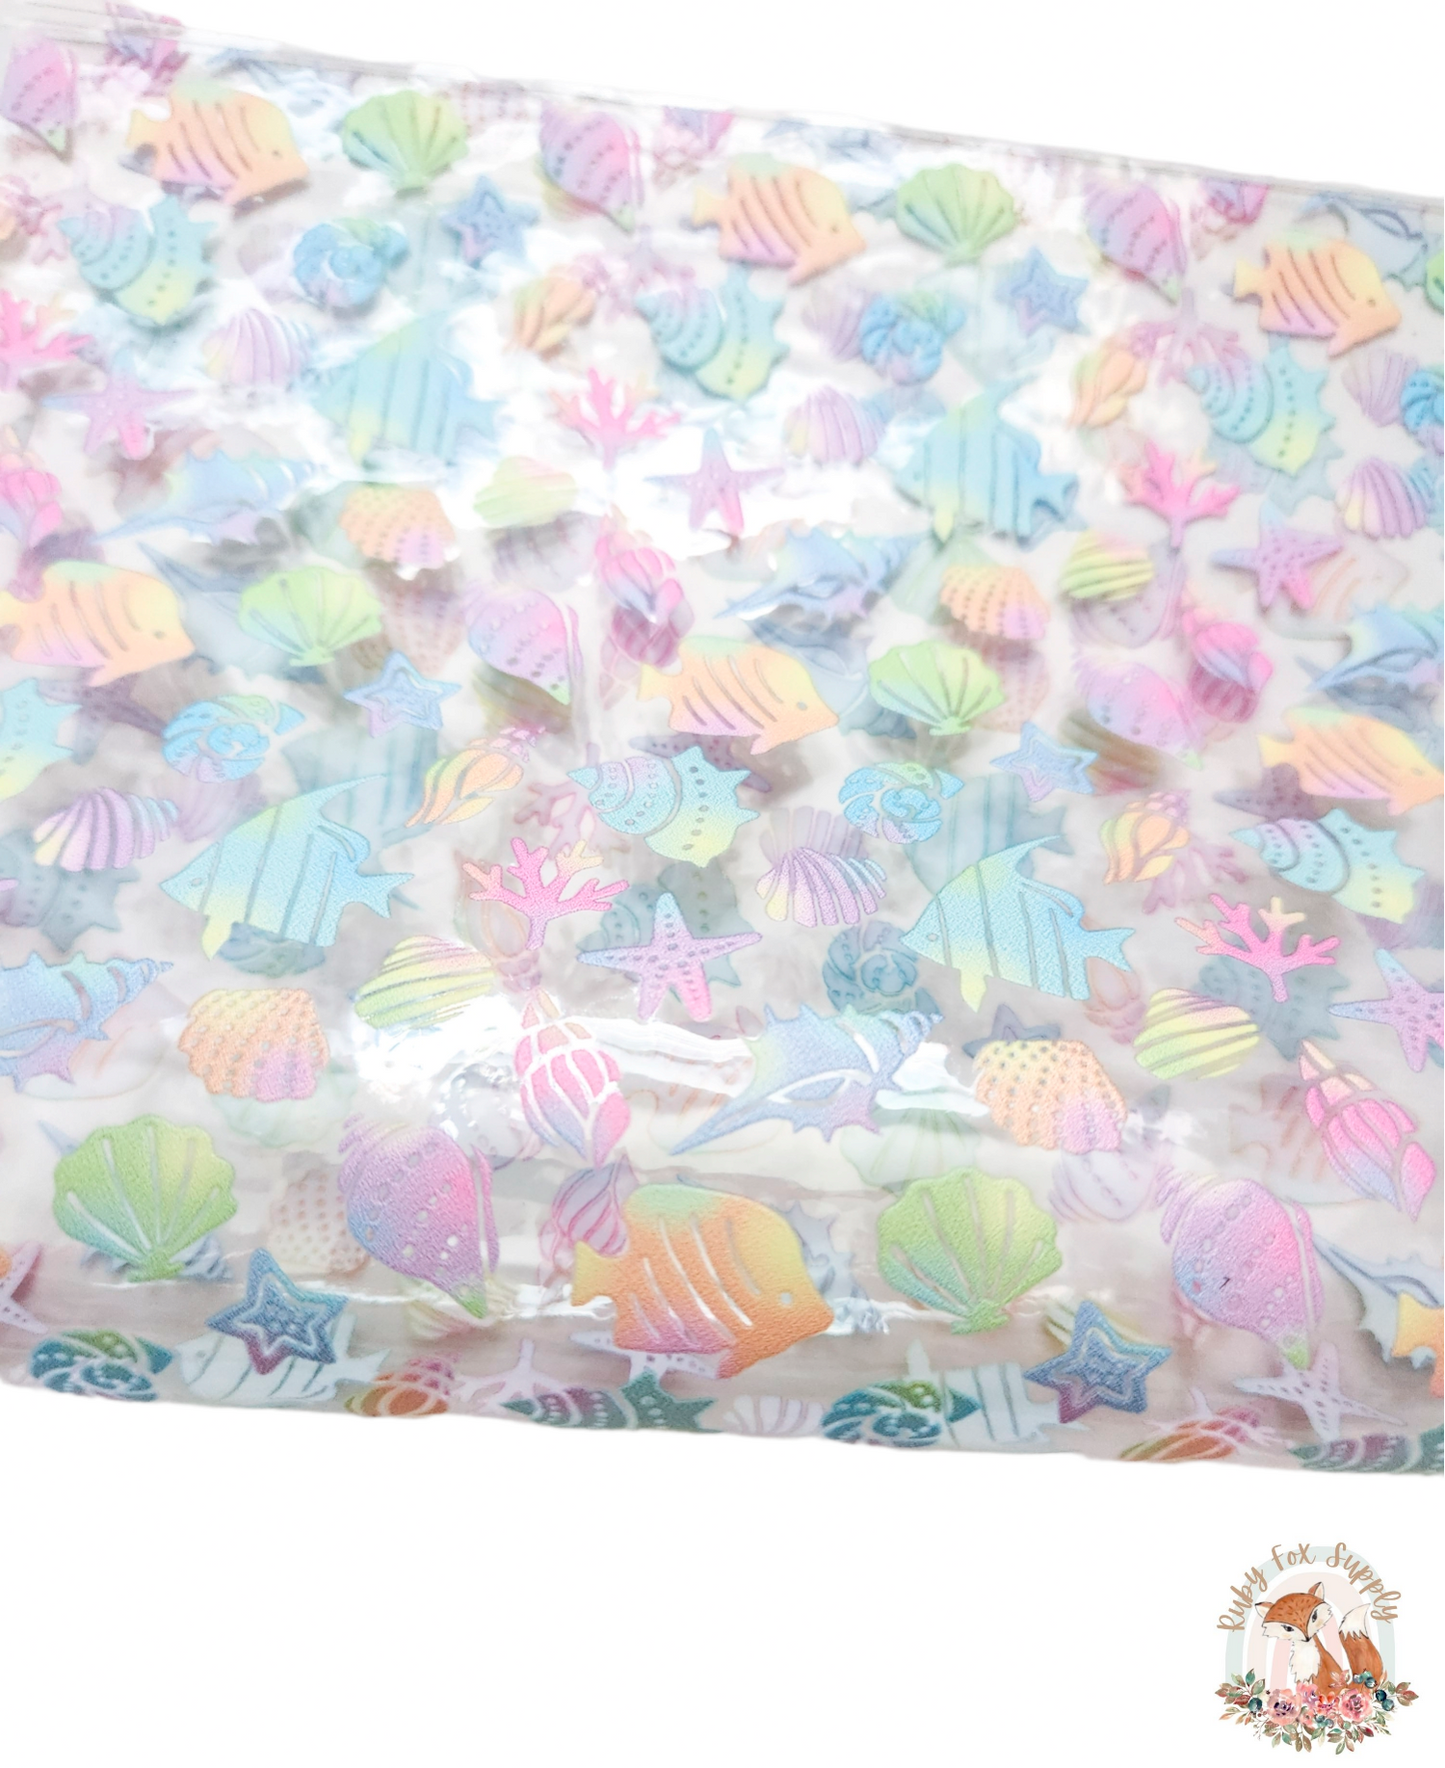 Pastel Sea Creatures Printed Jelly sheet